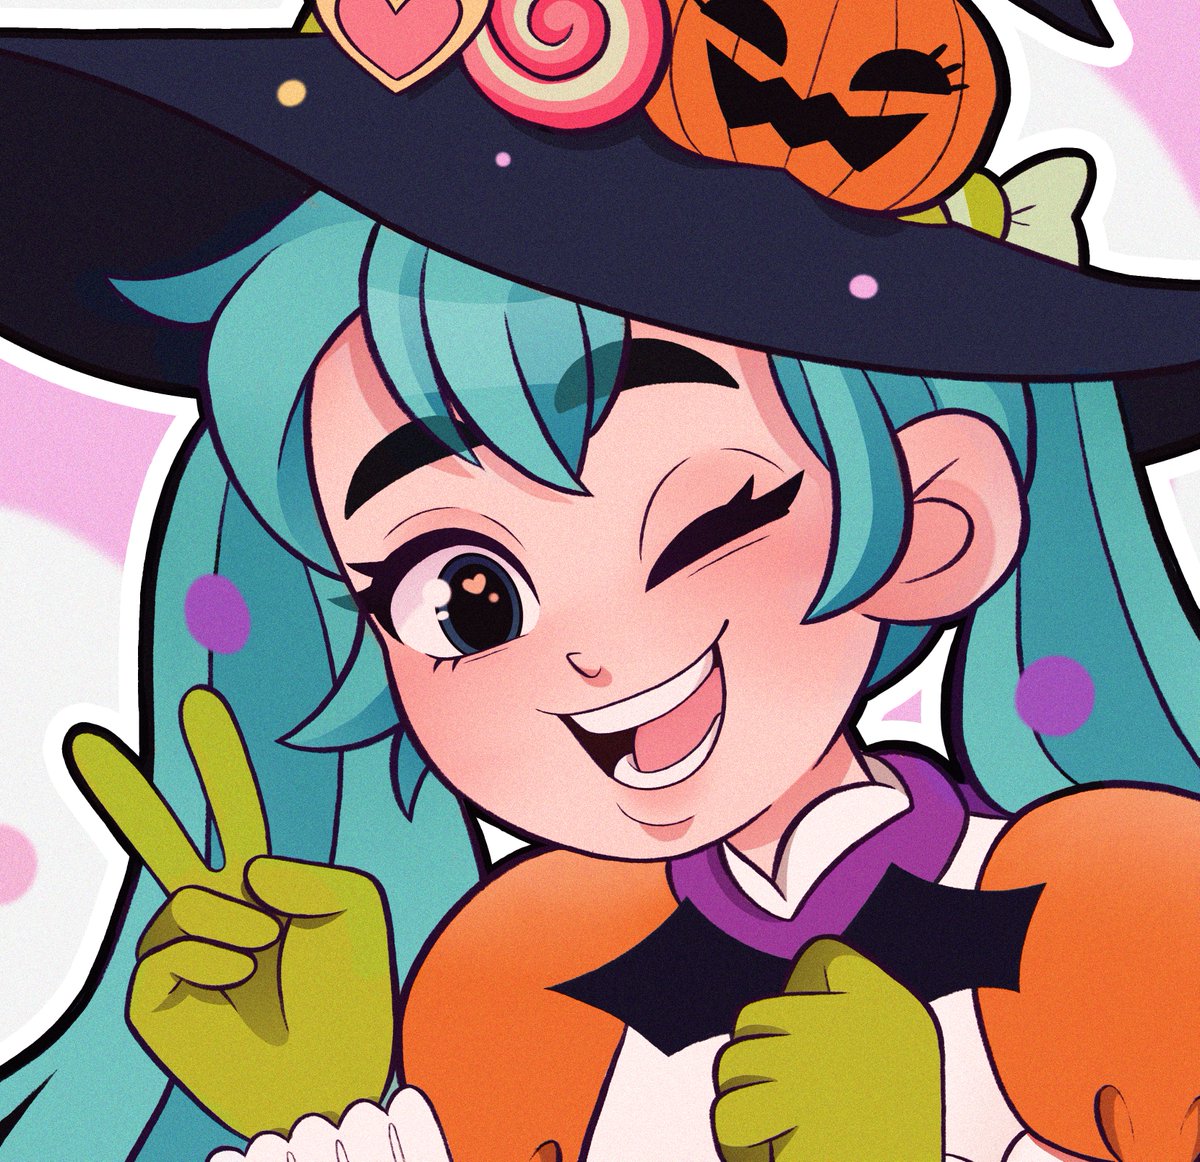 HAPPY HALLOWEEN EVERYONE!! 🎃🦇💀 As soon as I saw the Miku Halloween design by @cherrybeez_, I knew I had to draw her! I hope you guys had a great Halloween, despite the circumstances- hopefully we can all go out and be spooky next year 💖